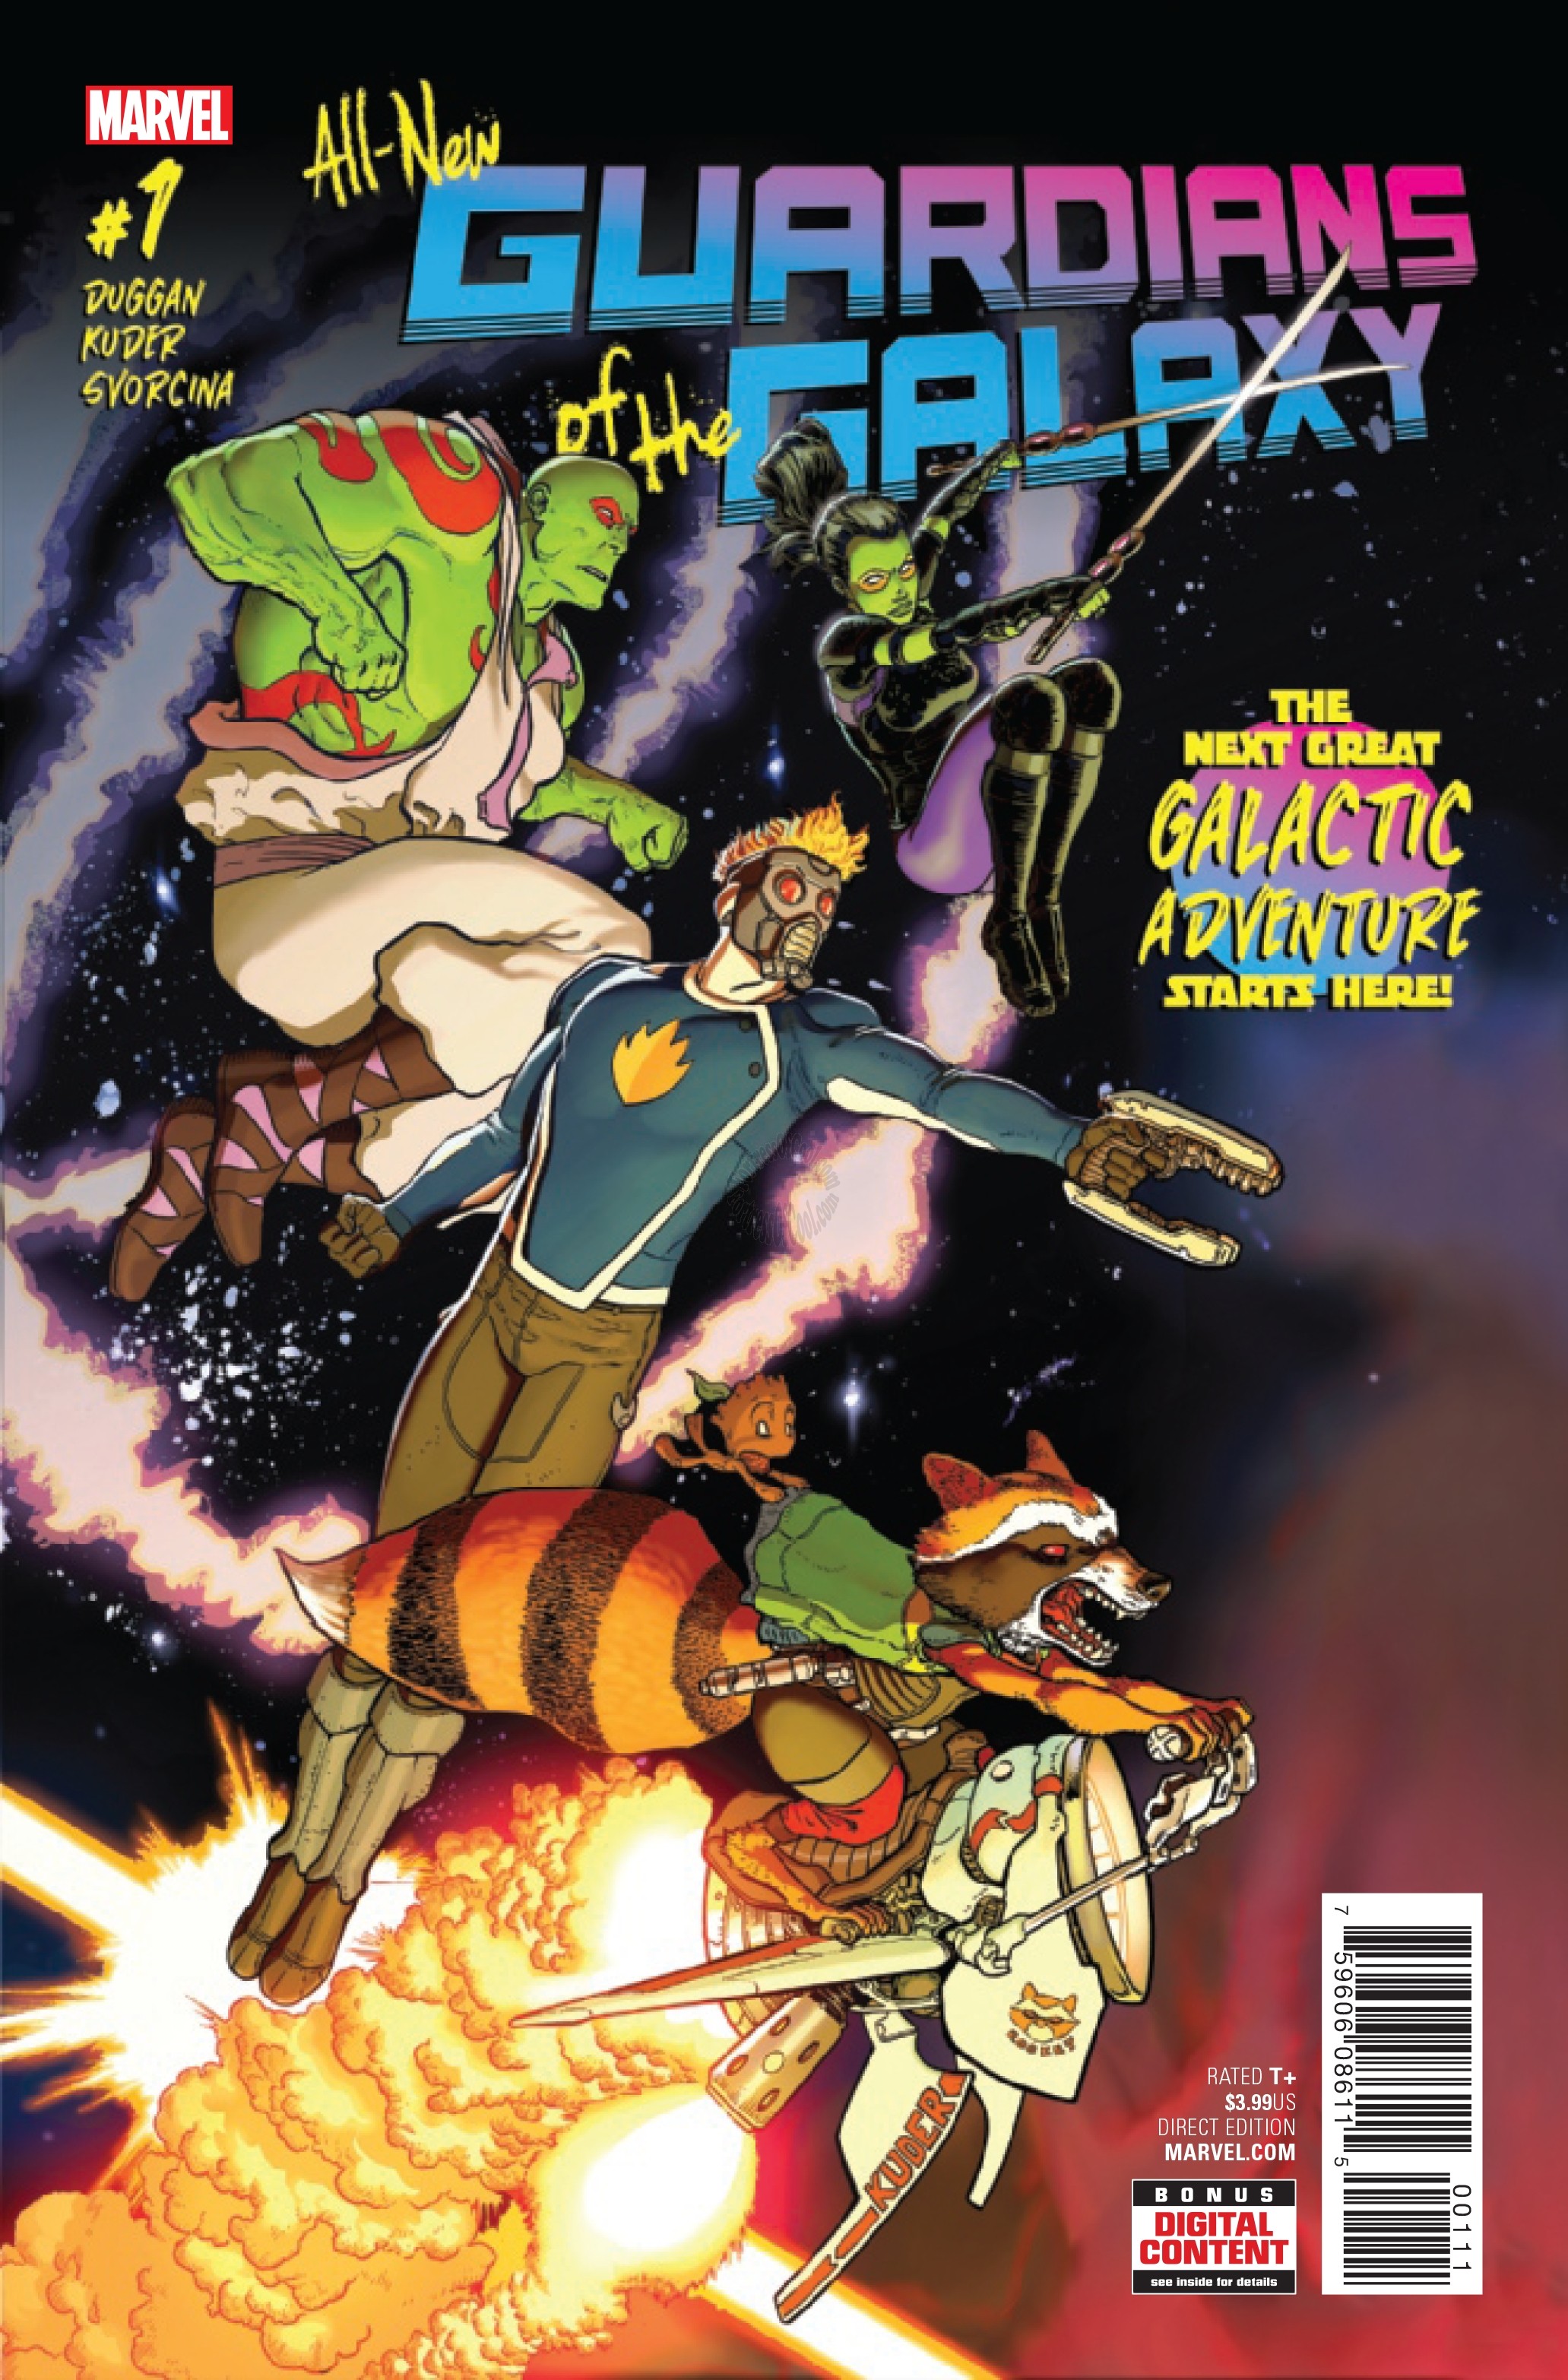 All New Guardians of the Galaxy #1